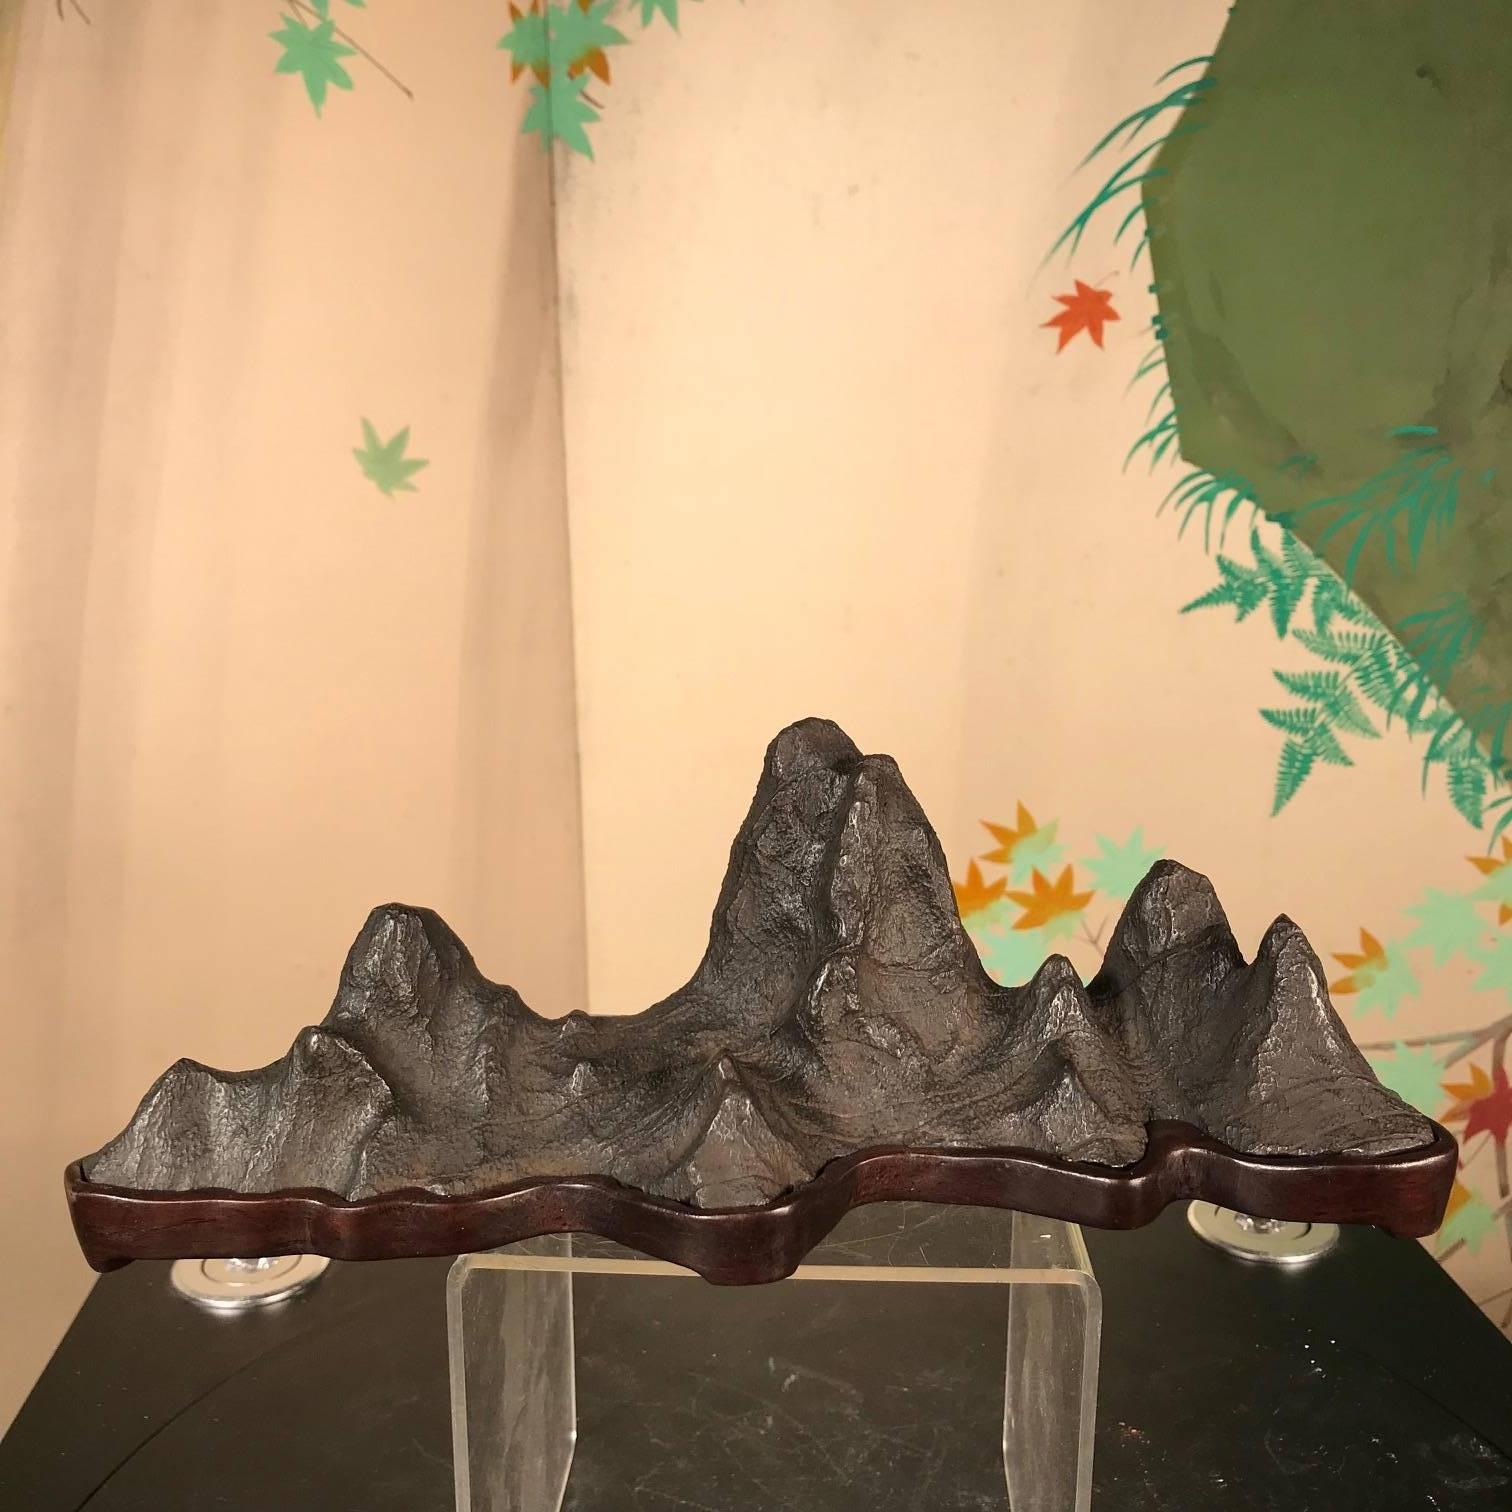 Chinese Tall Mountain Scholar Rock, Natural Bonsai Suiseki with Eight High Peaks